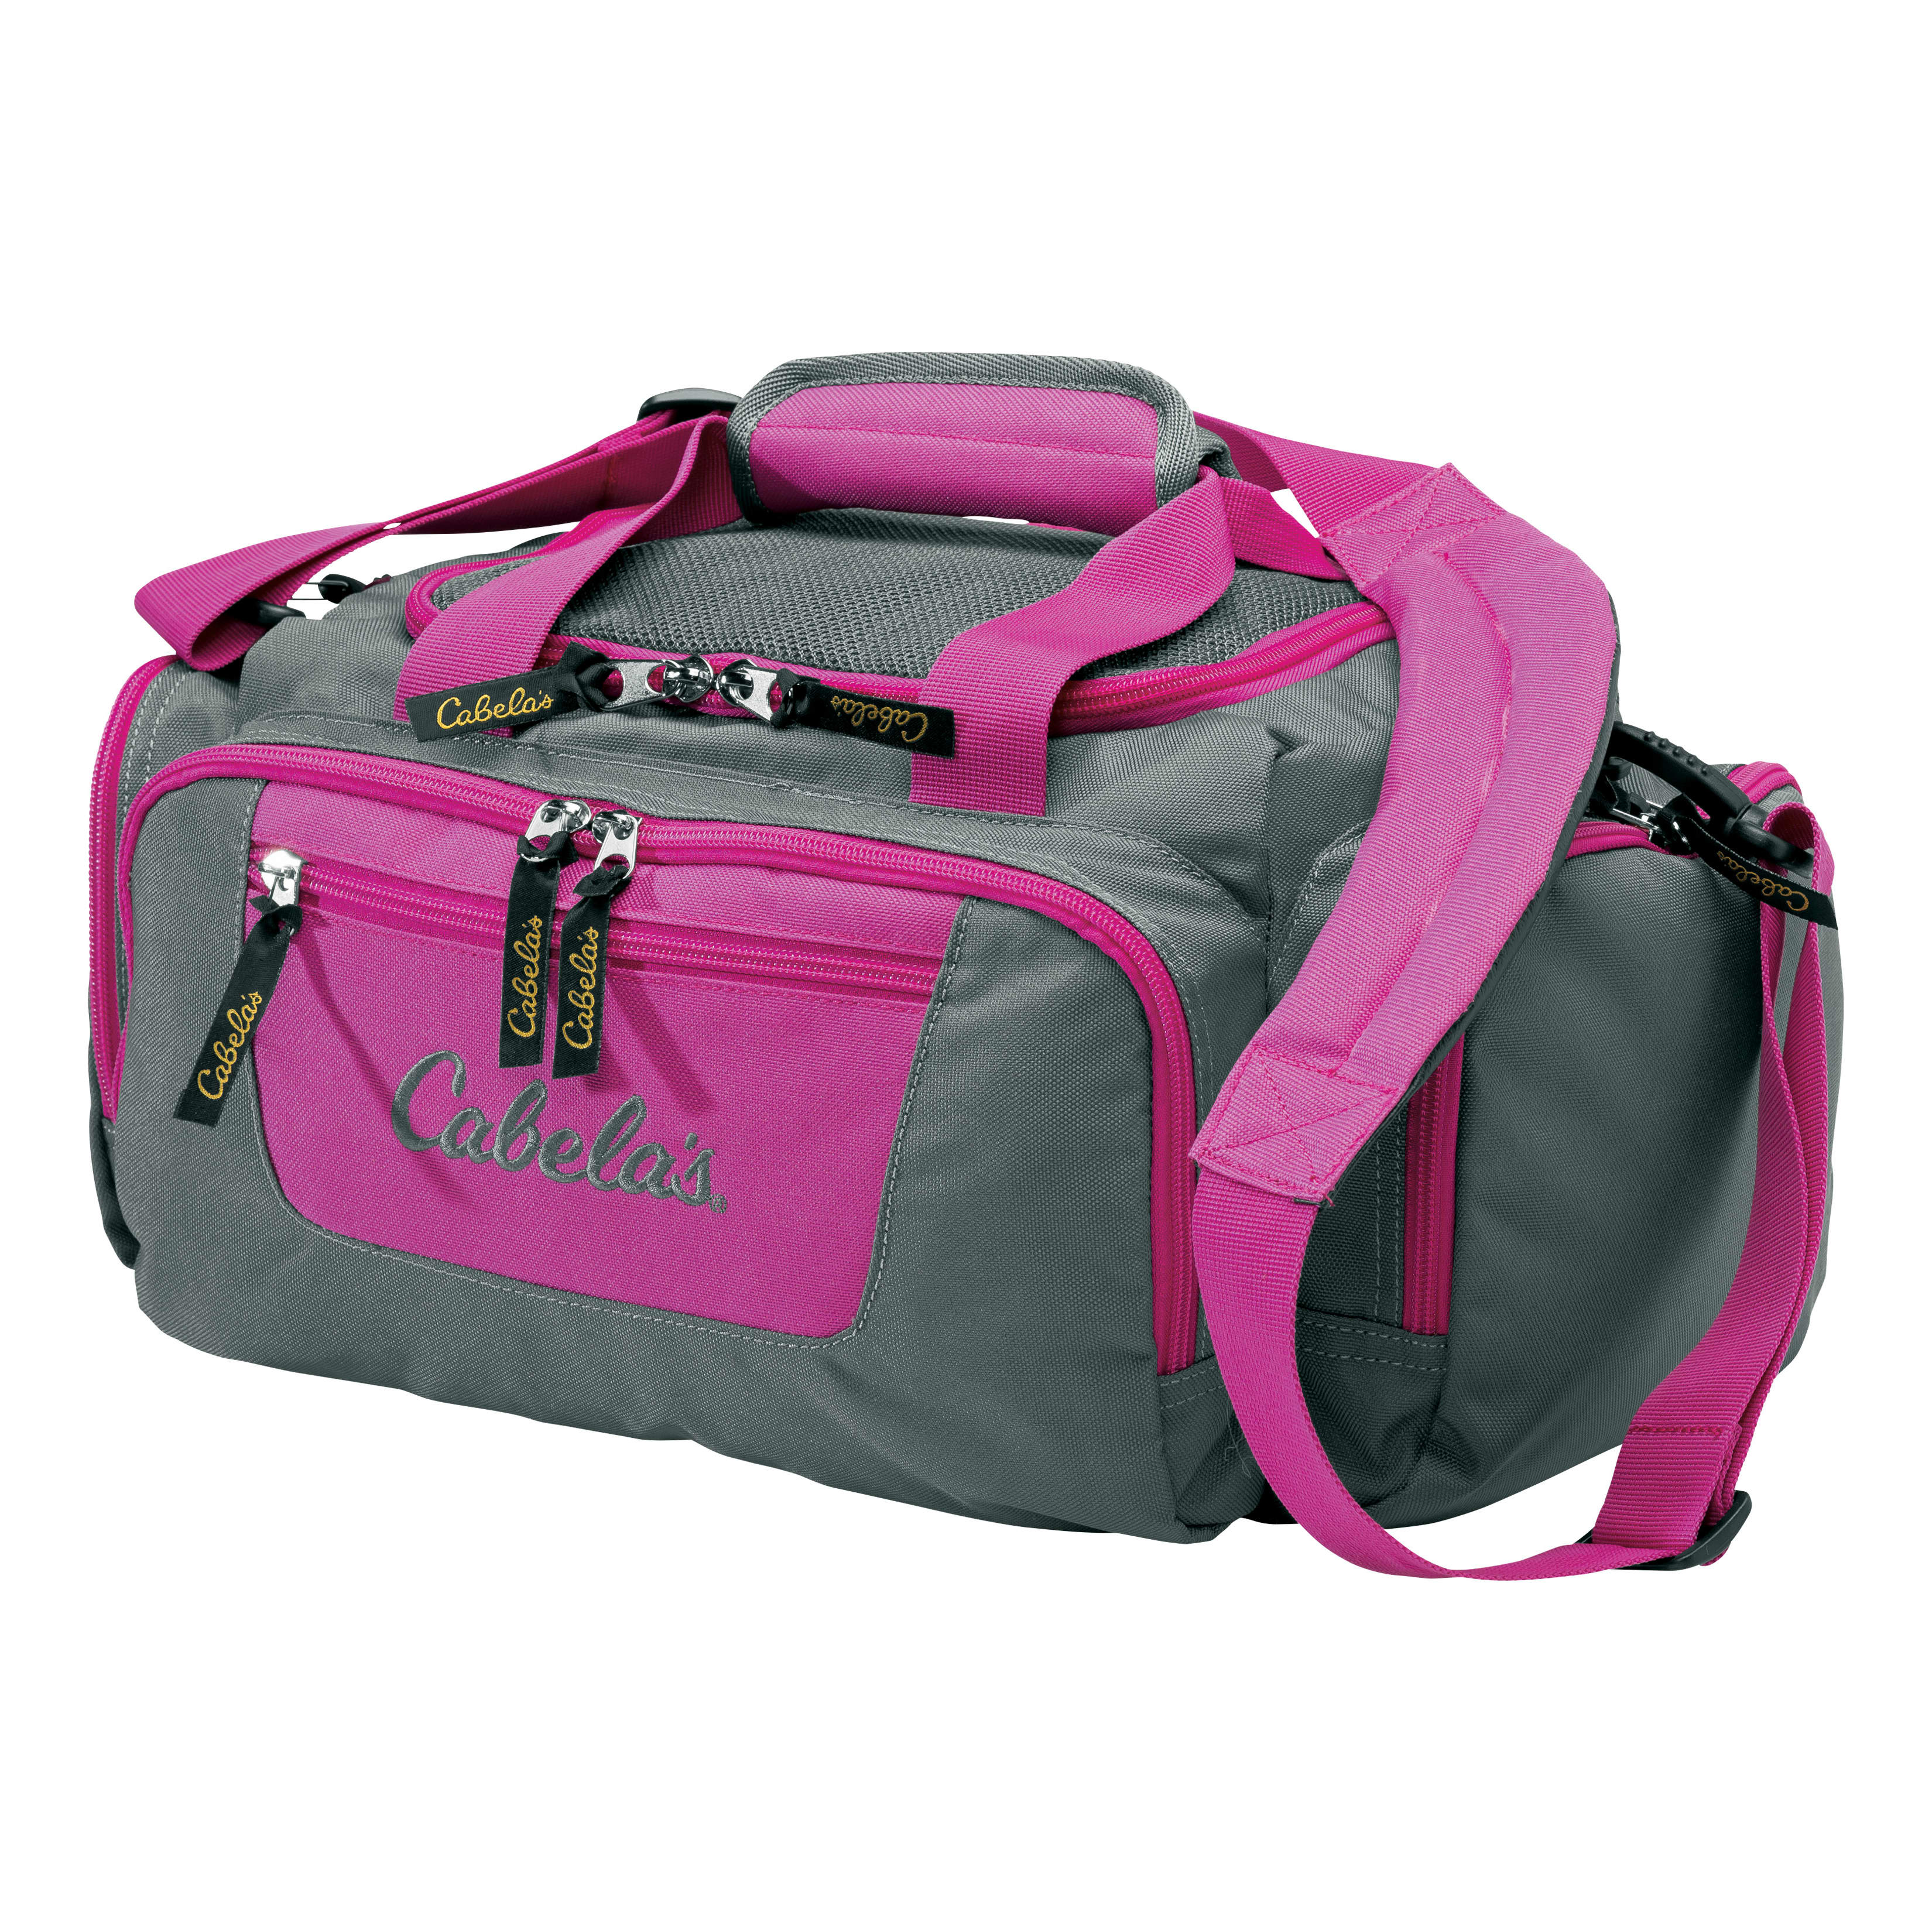 Cabela's Catch-All Gear Bags - Pink